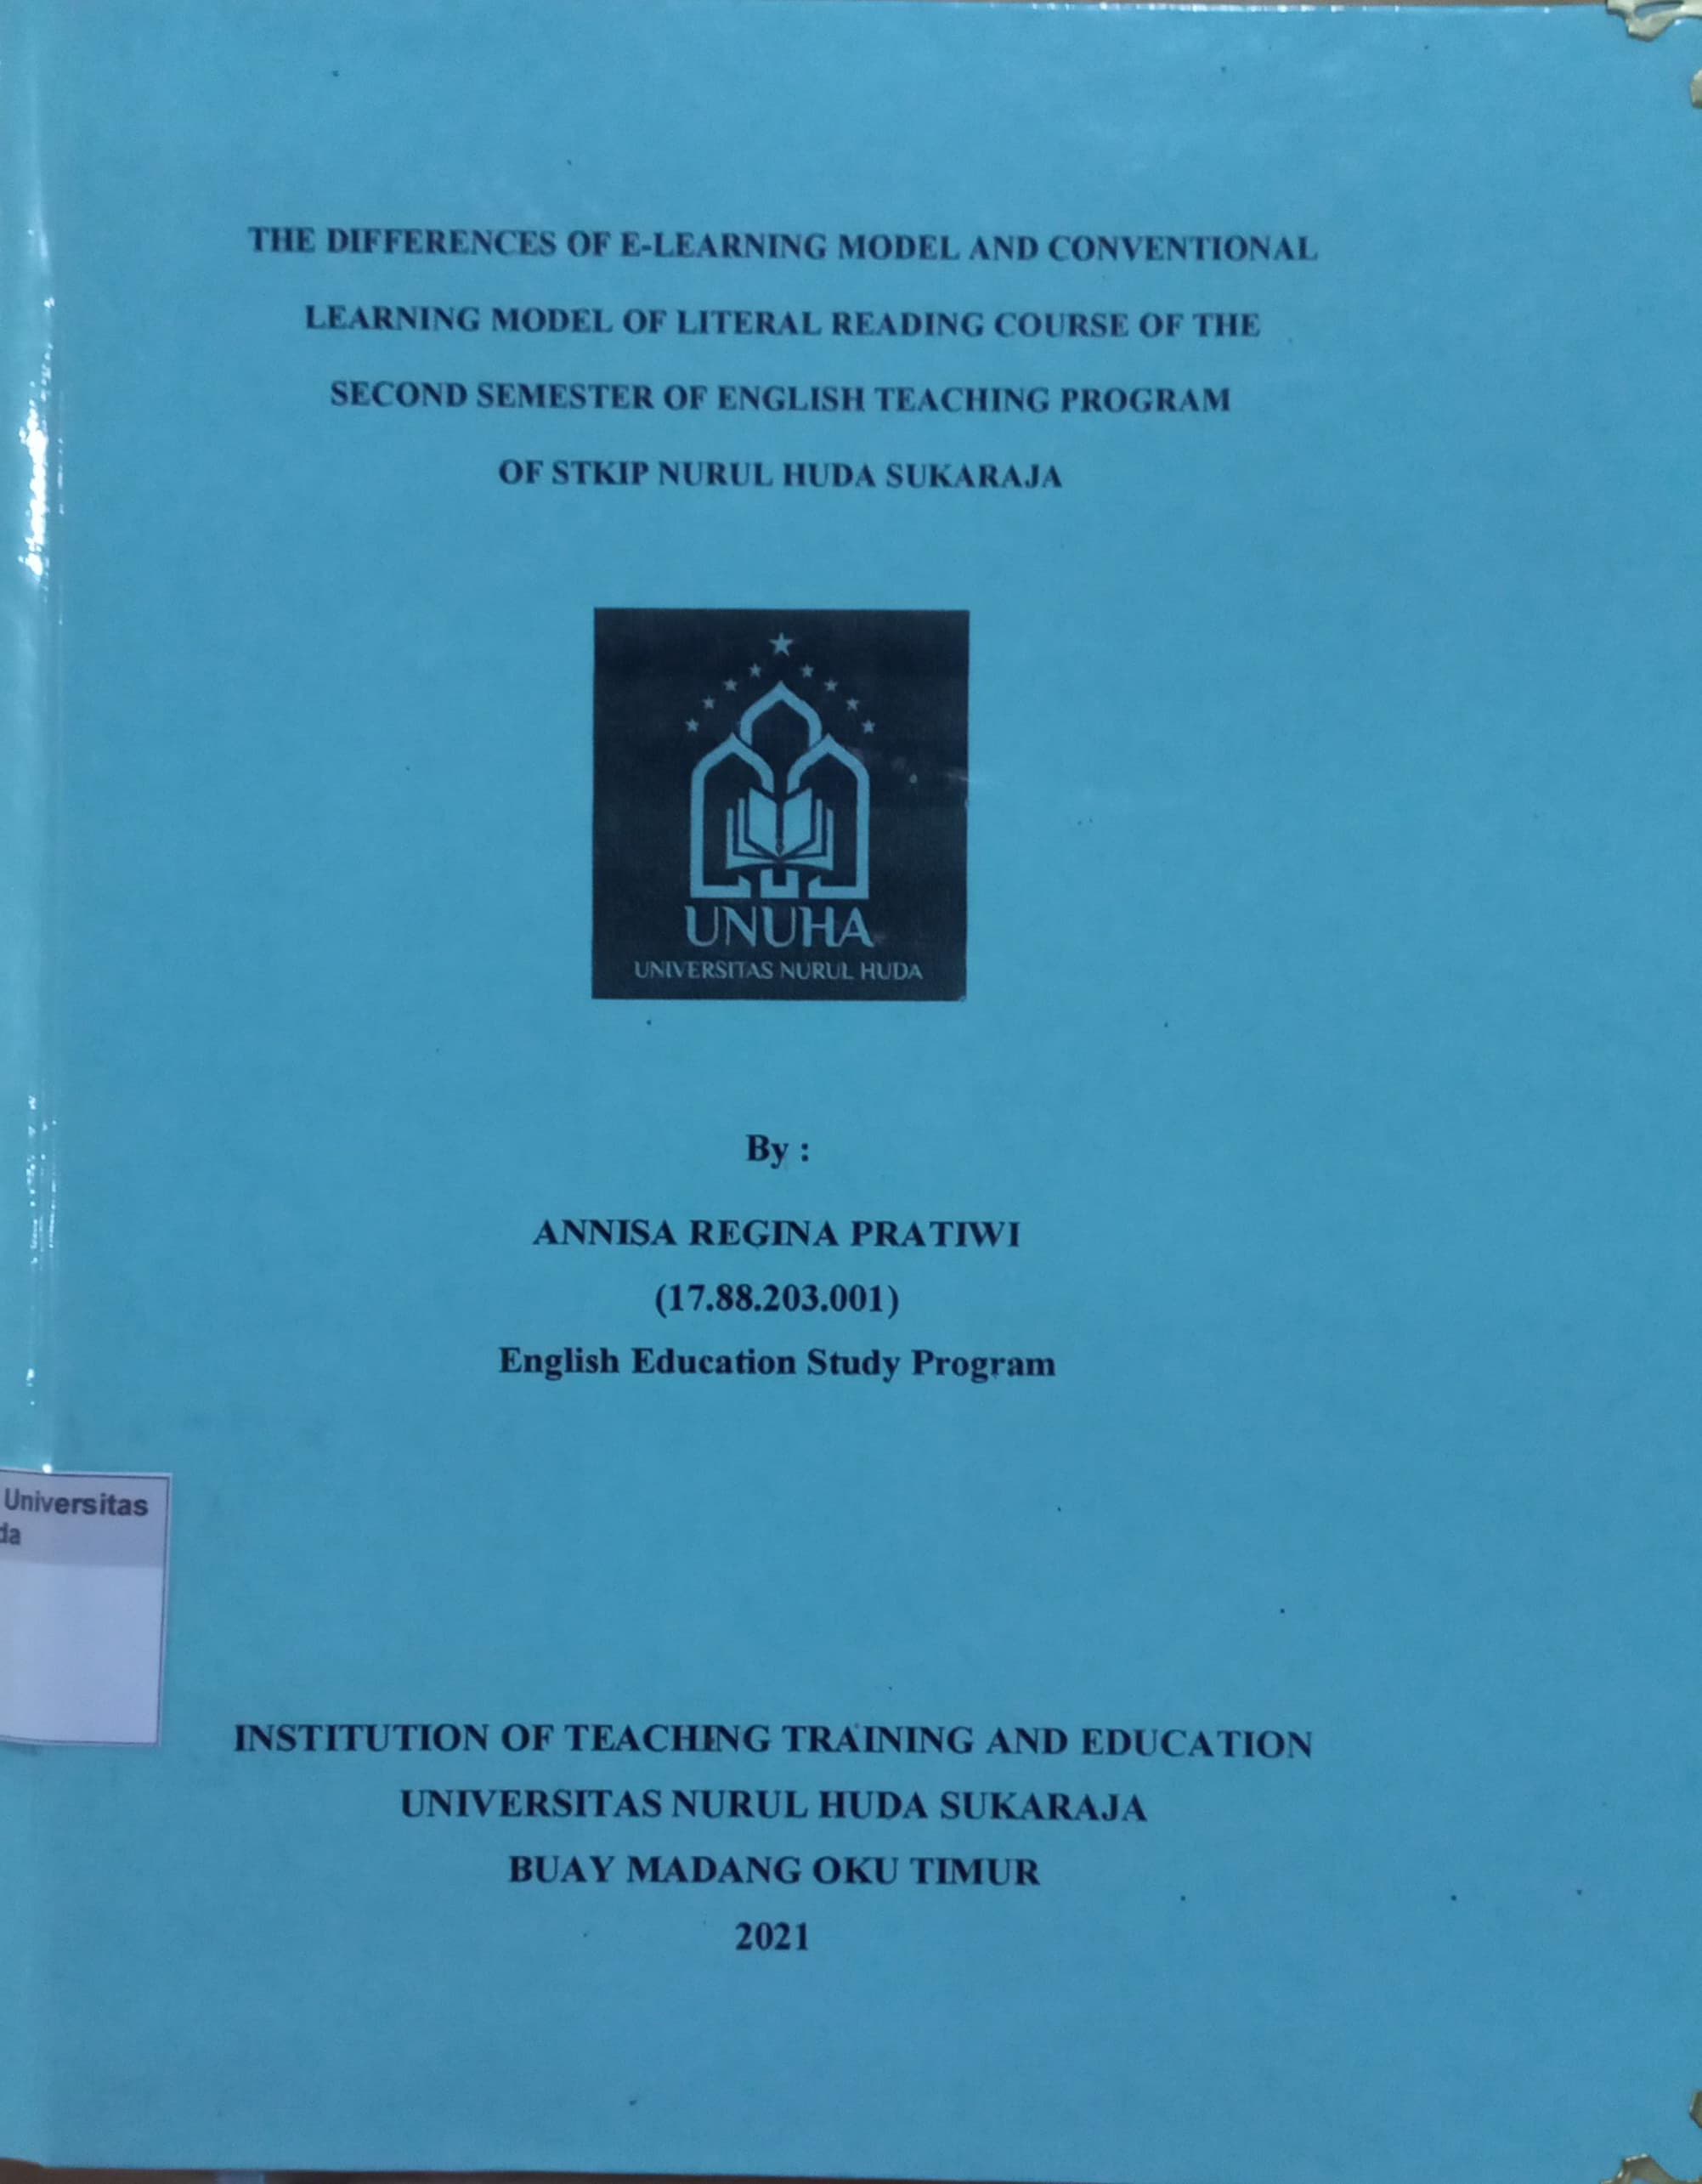 The Defferences of E-Learning Model And Conventional Learning Model of Literal Reading Course of the Second Semester of English Teaching Program of STKIP Nurul Huda Sukaraja